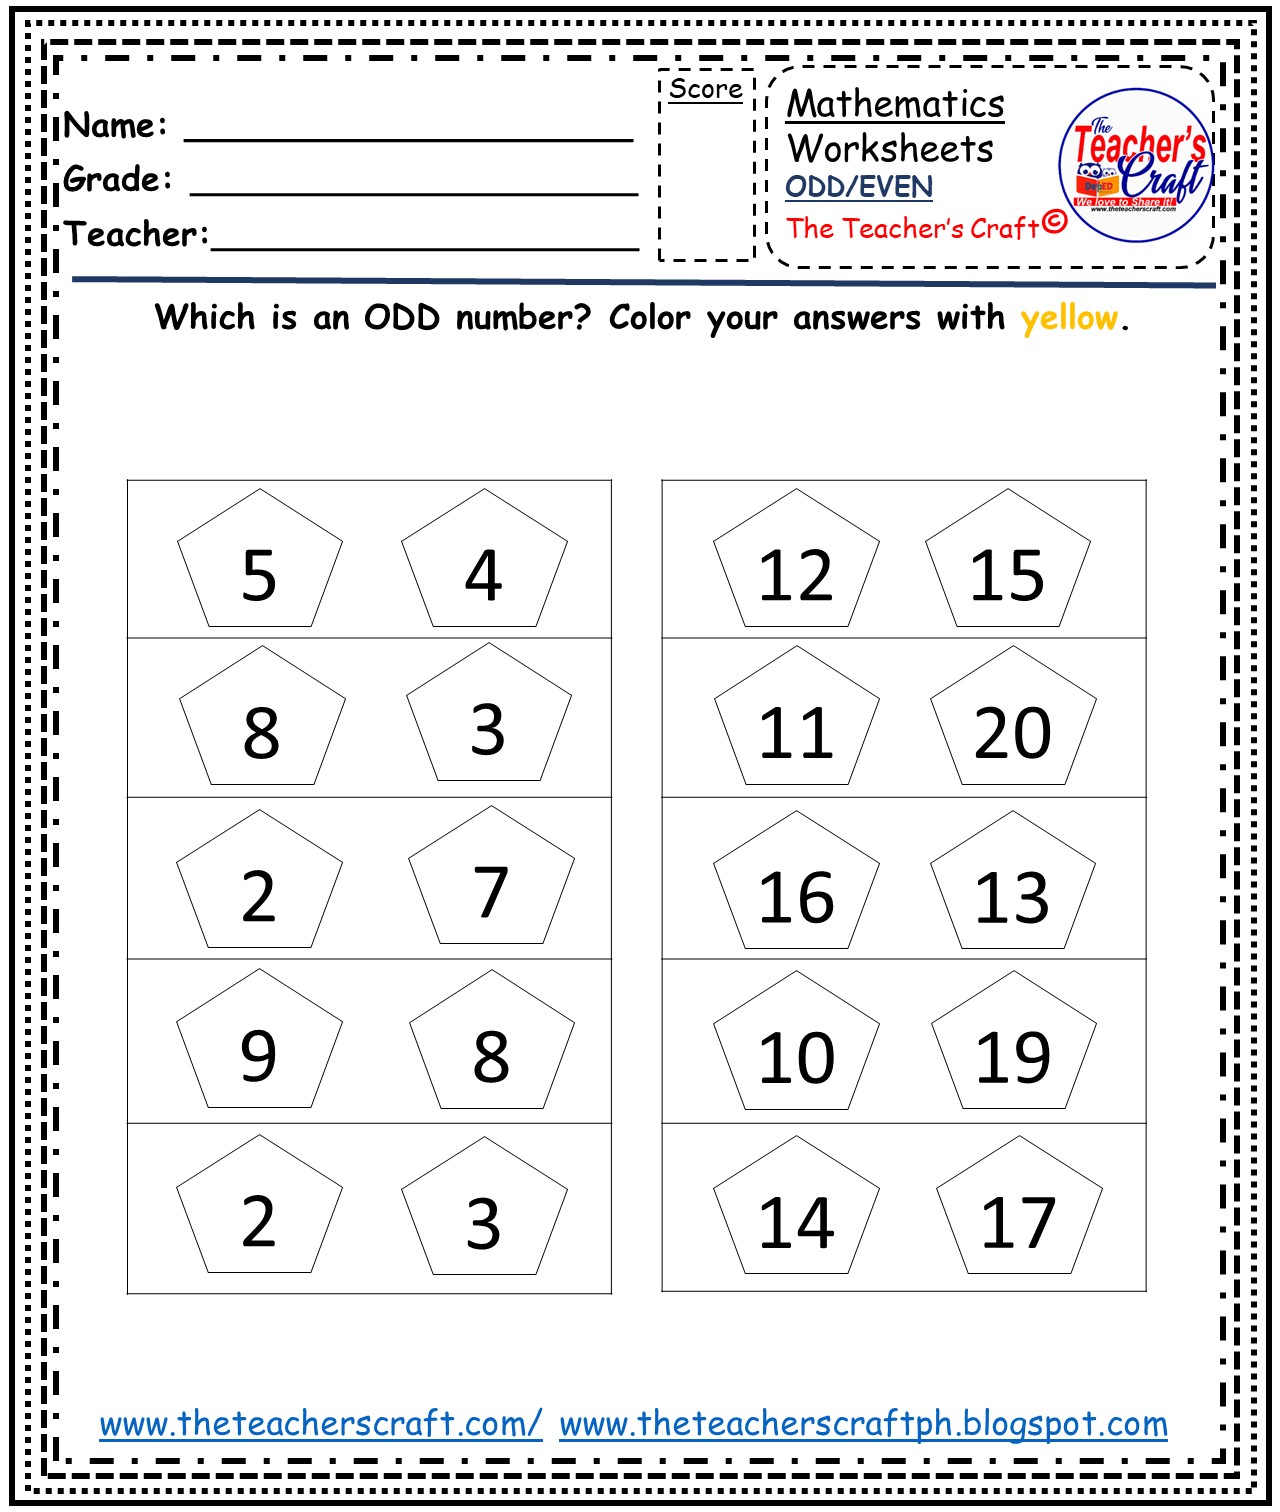 odd-even-numbers-worksheets-the-teacher-s-craft